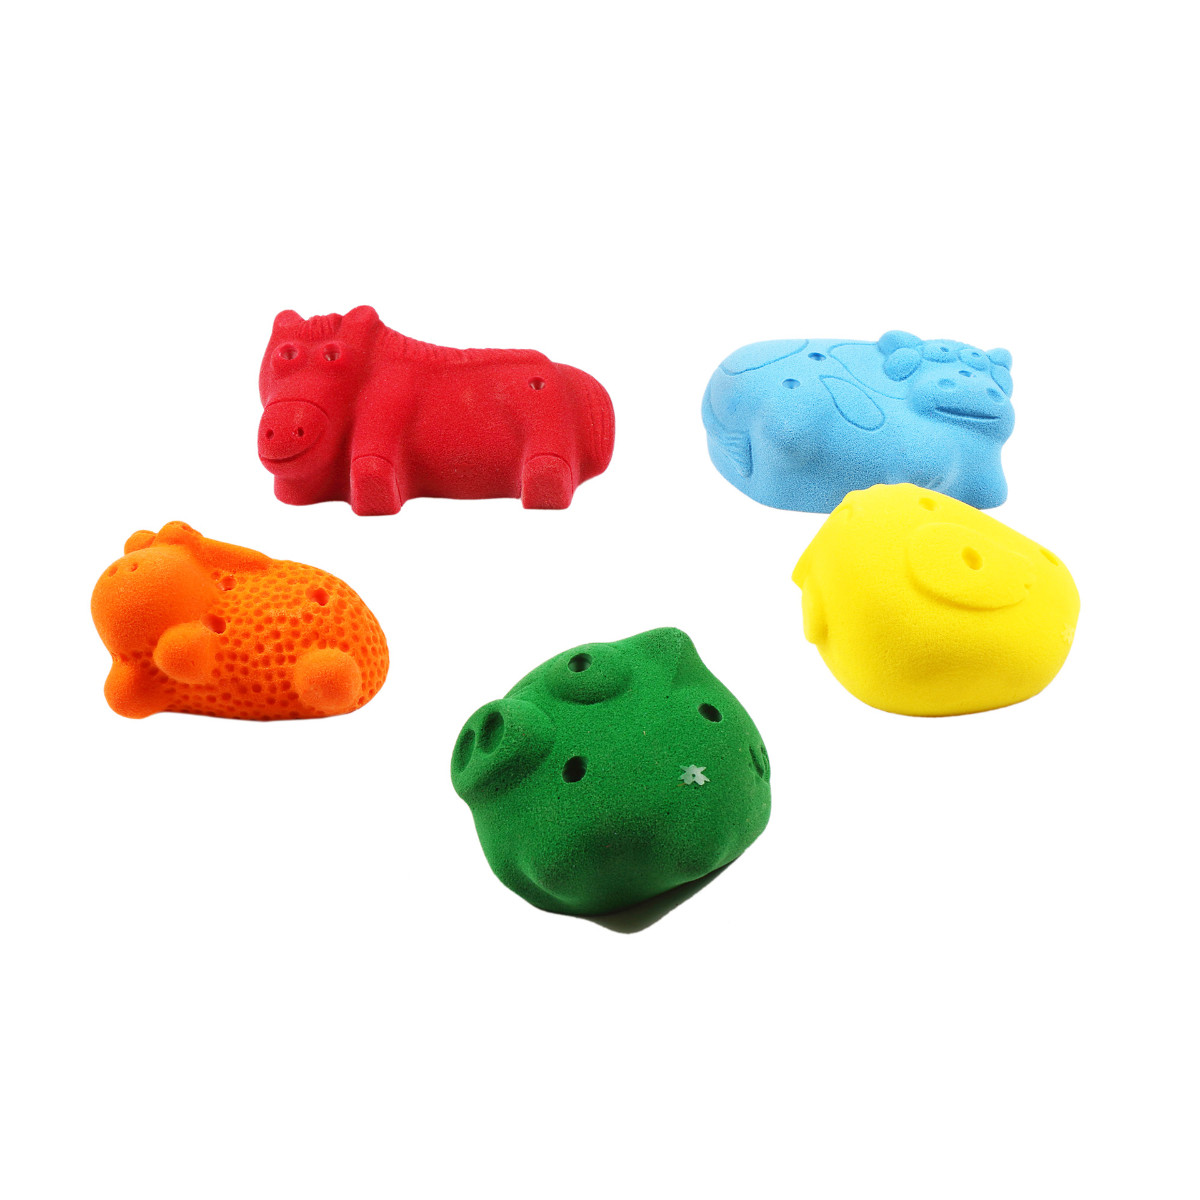 Farm Animal Climbing Holds - Screw-ons - Assorted Bright Tone Colors